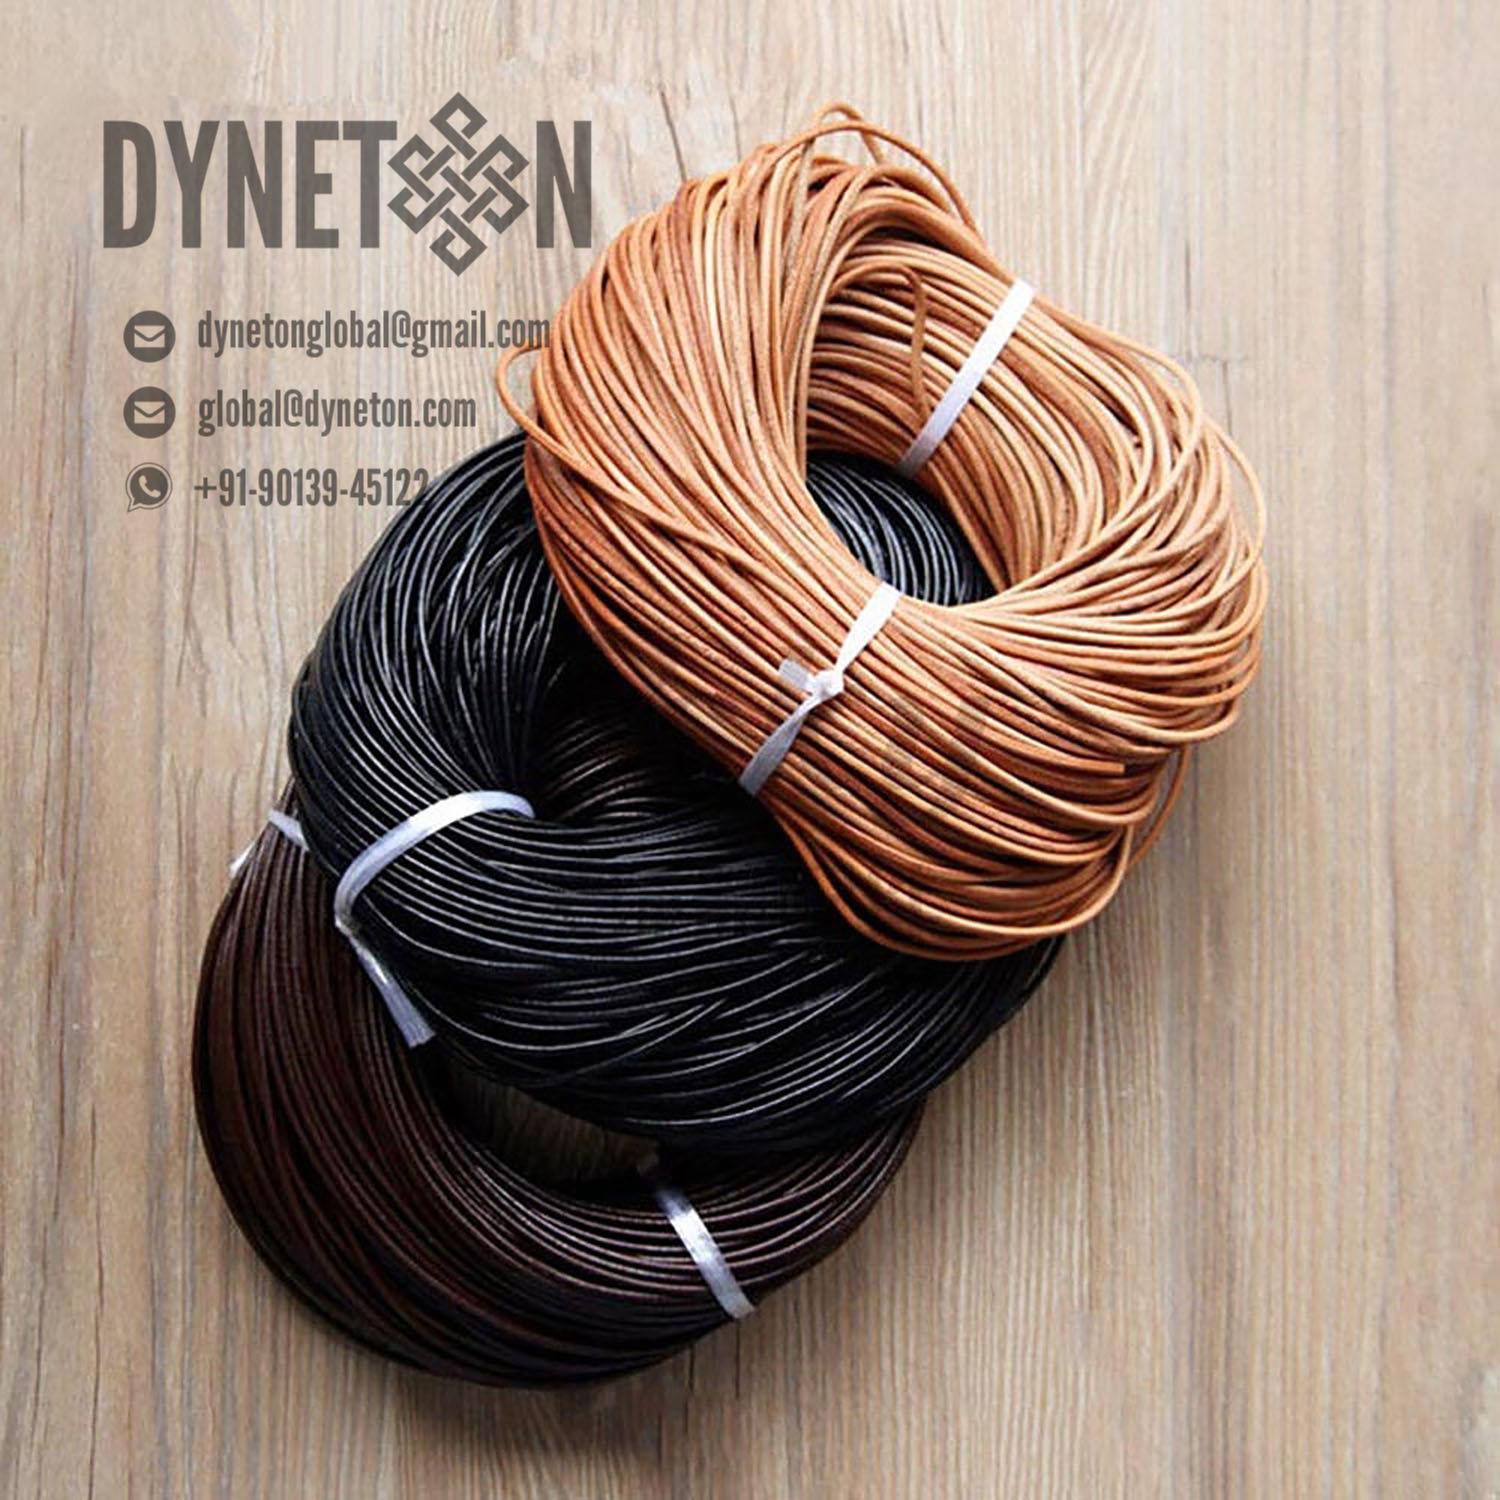 2mm Round Leather Cord - DYNETON / Round Leather Cords 2 mm